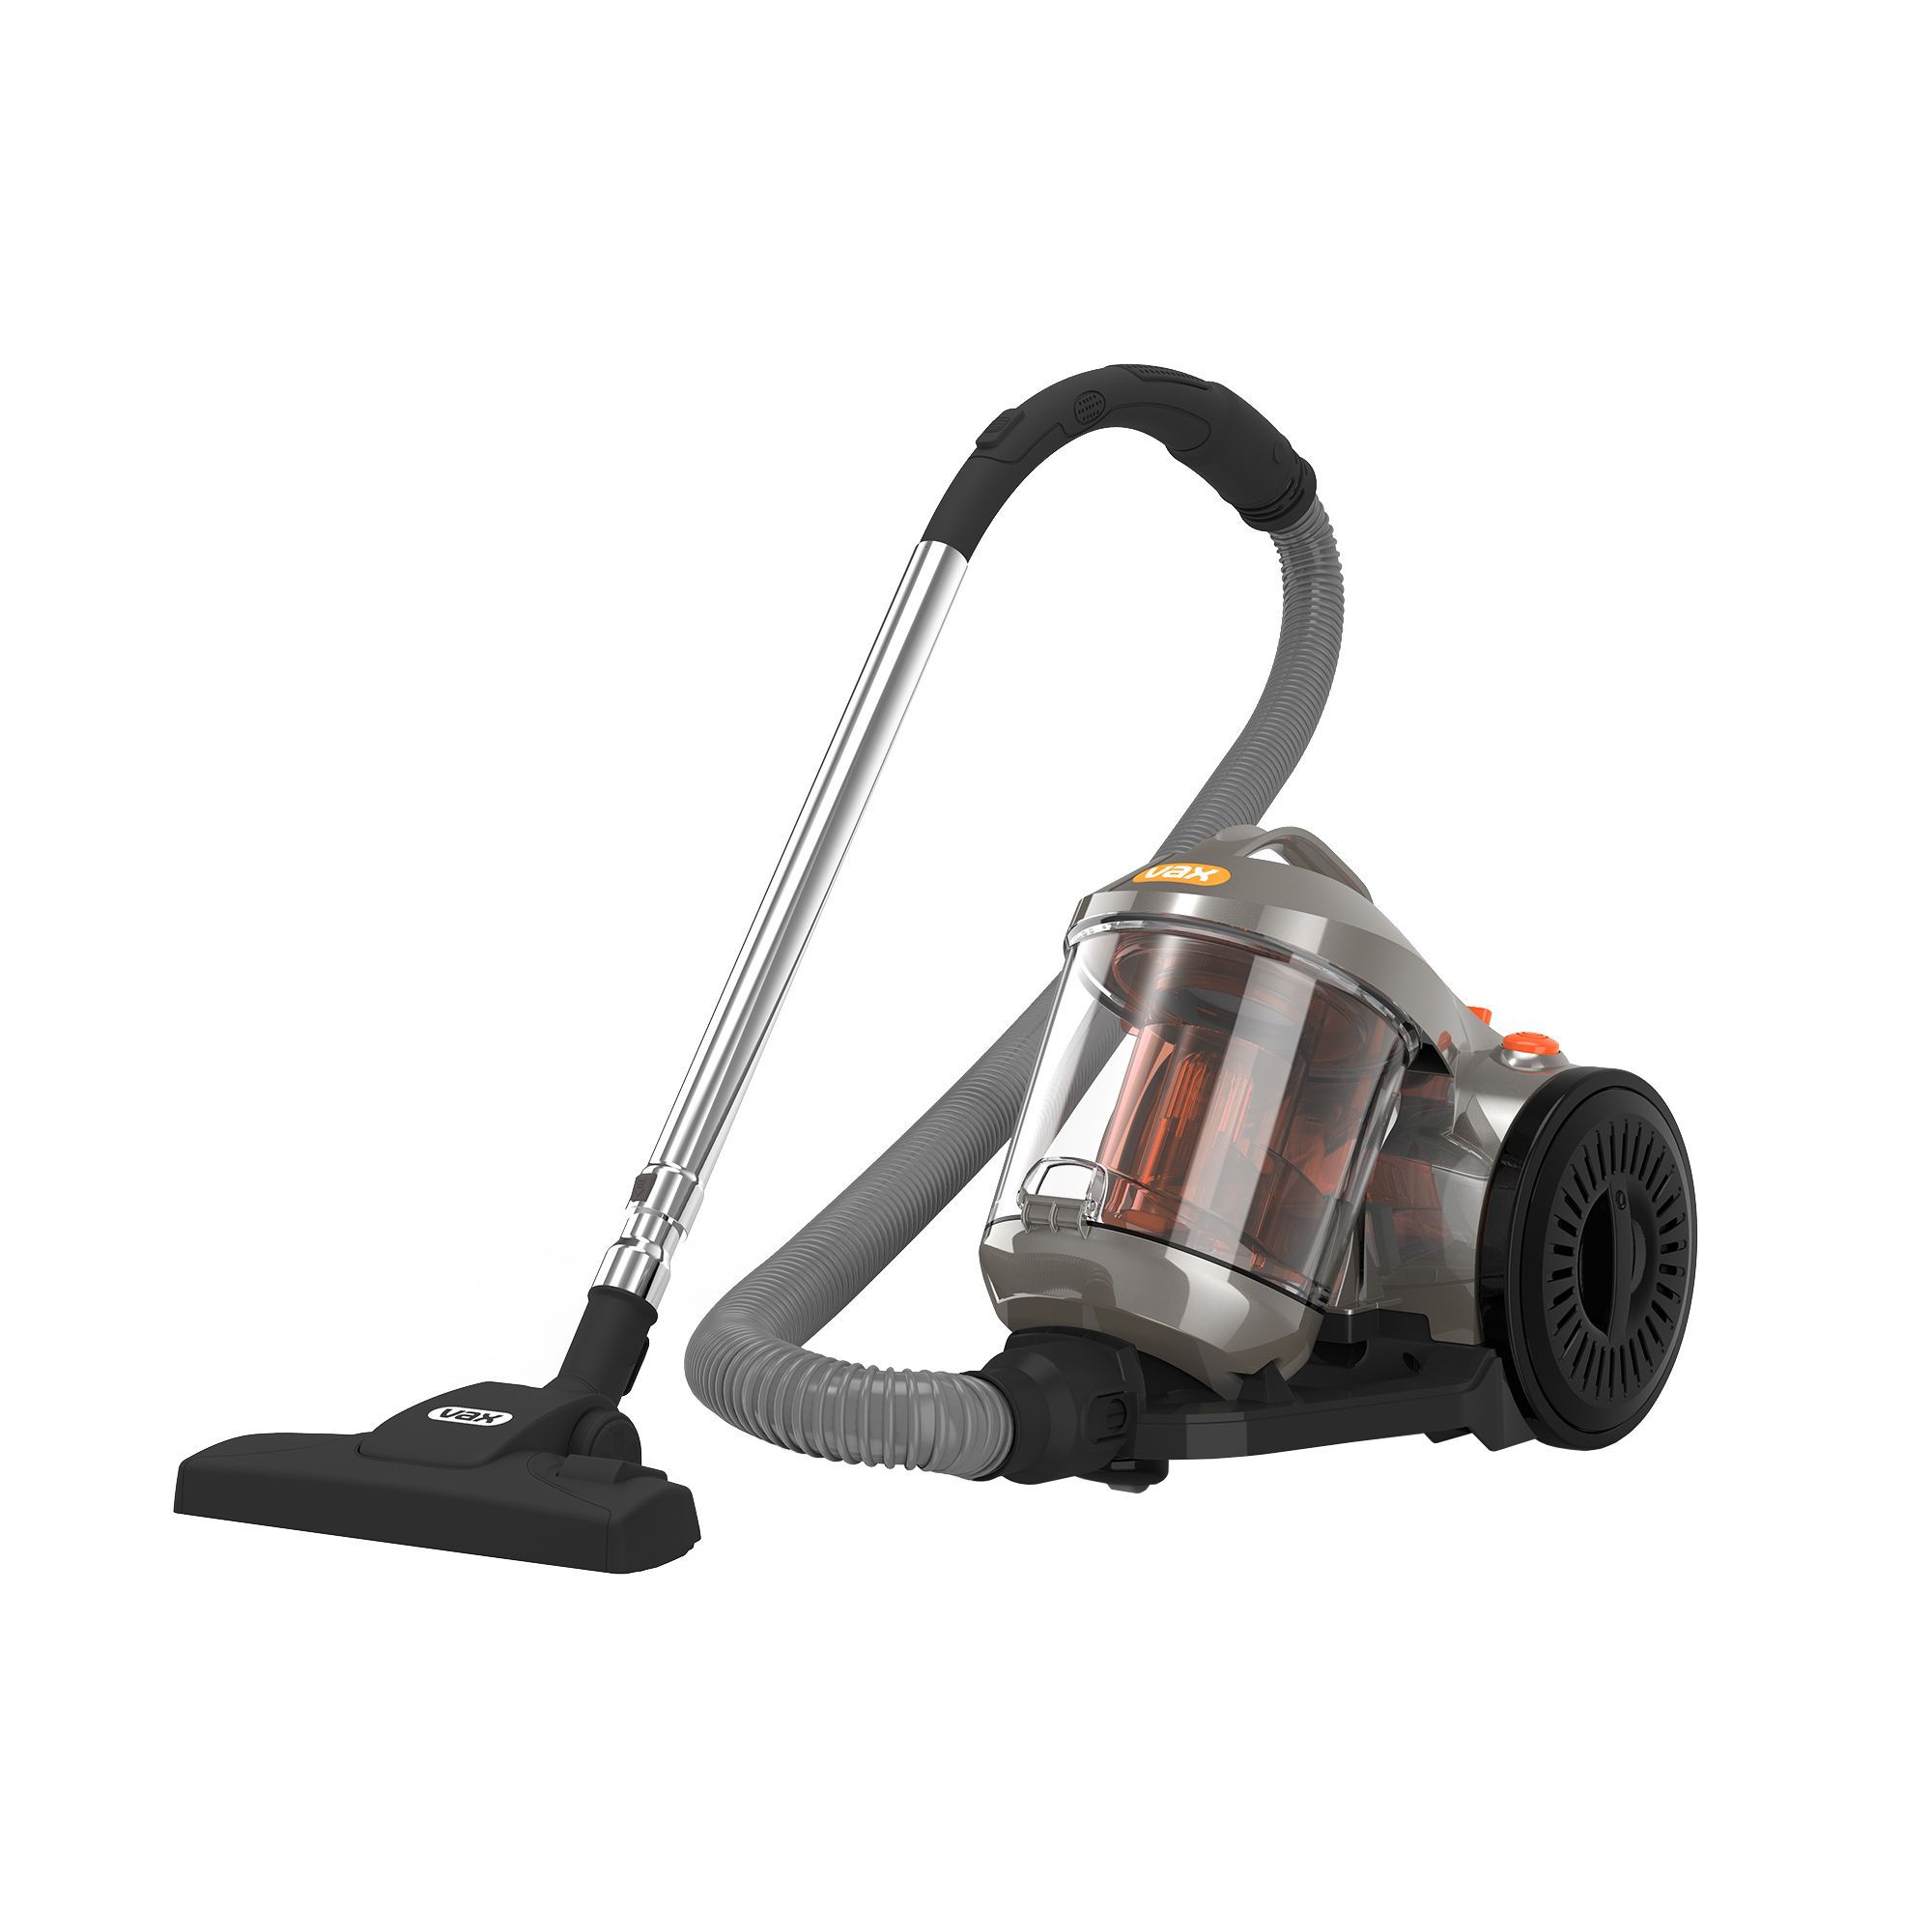 Canister vacuum cleaners. Пылесос Vax Power. Пылесос Vax c60. Пылесос Vax c85-AC-PH-E. Пылесос Vax c85-am-p-e.